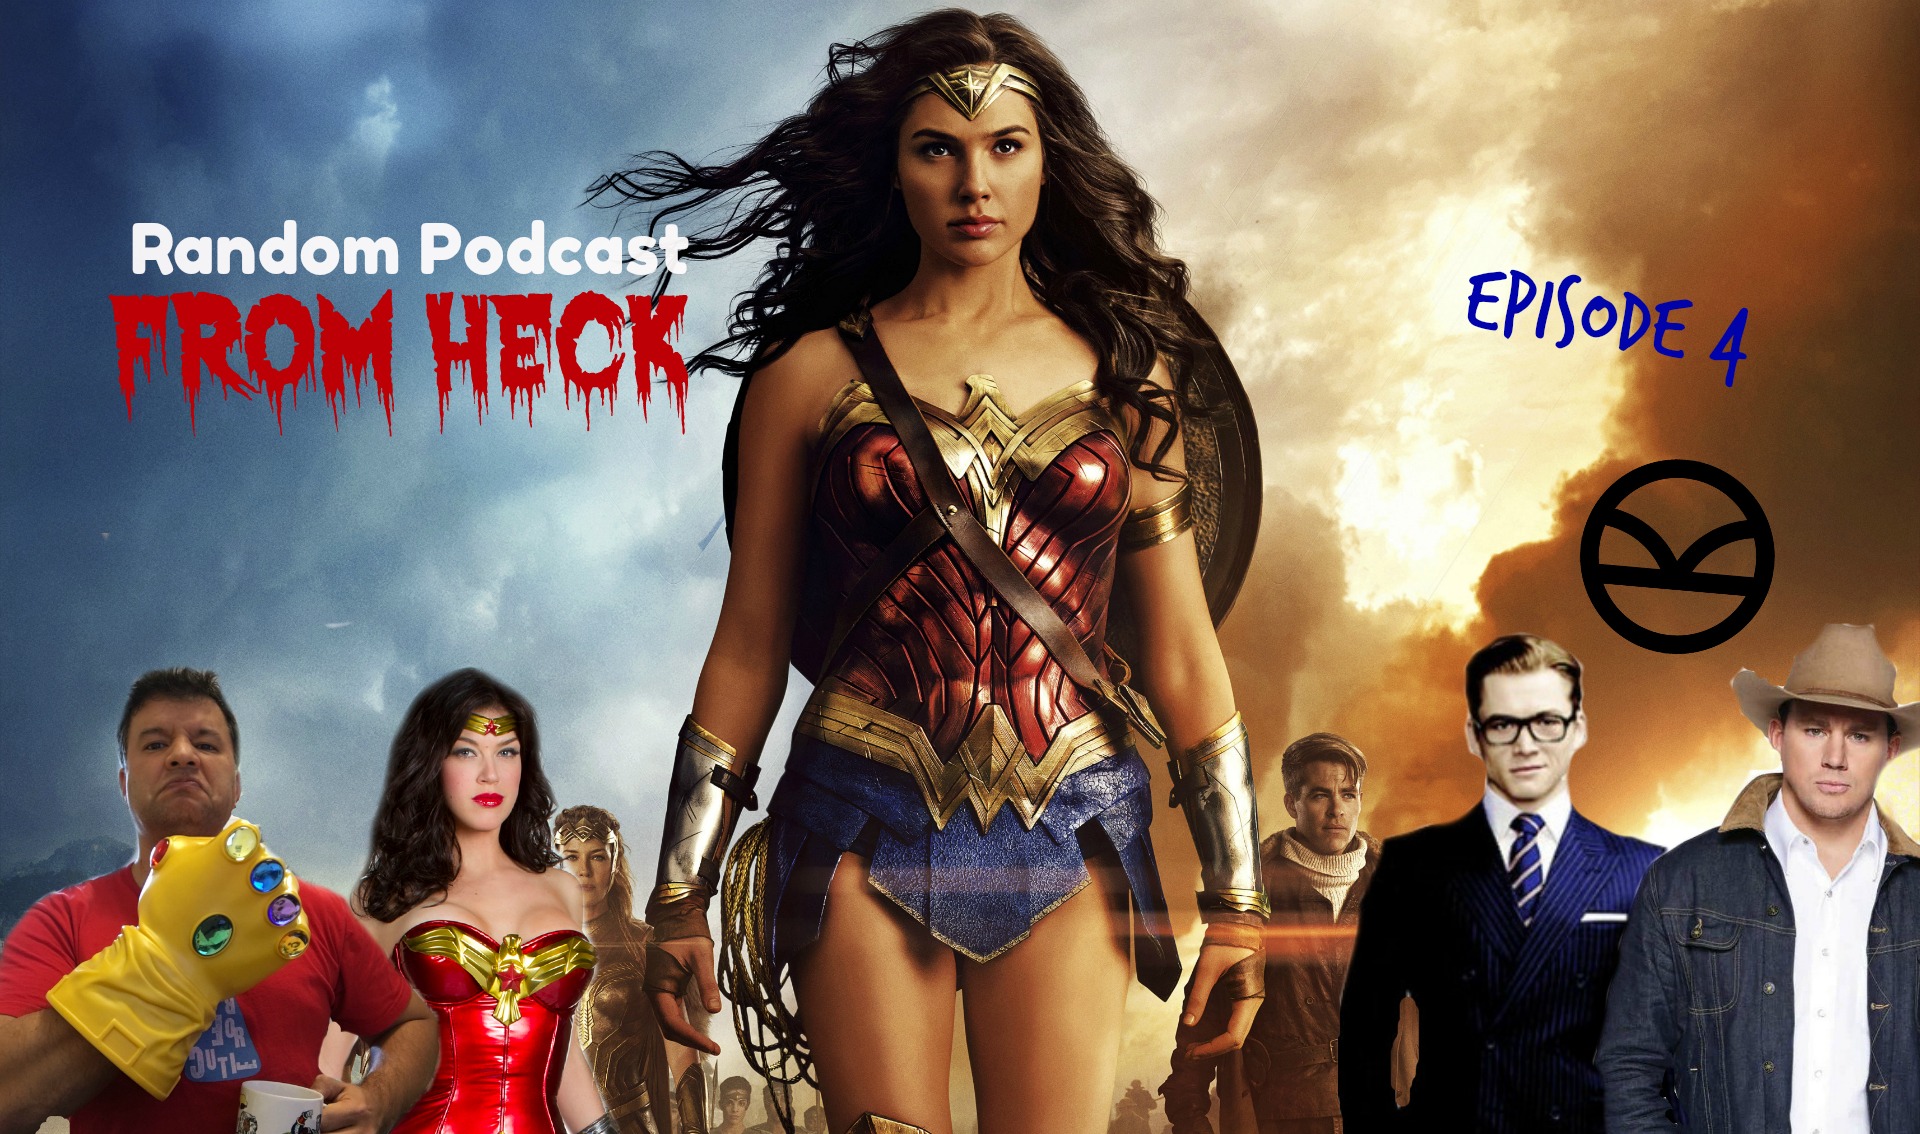 Episode 4 - Wonder Woman (Past and Present), Women in Media, Kingsman 2, and More